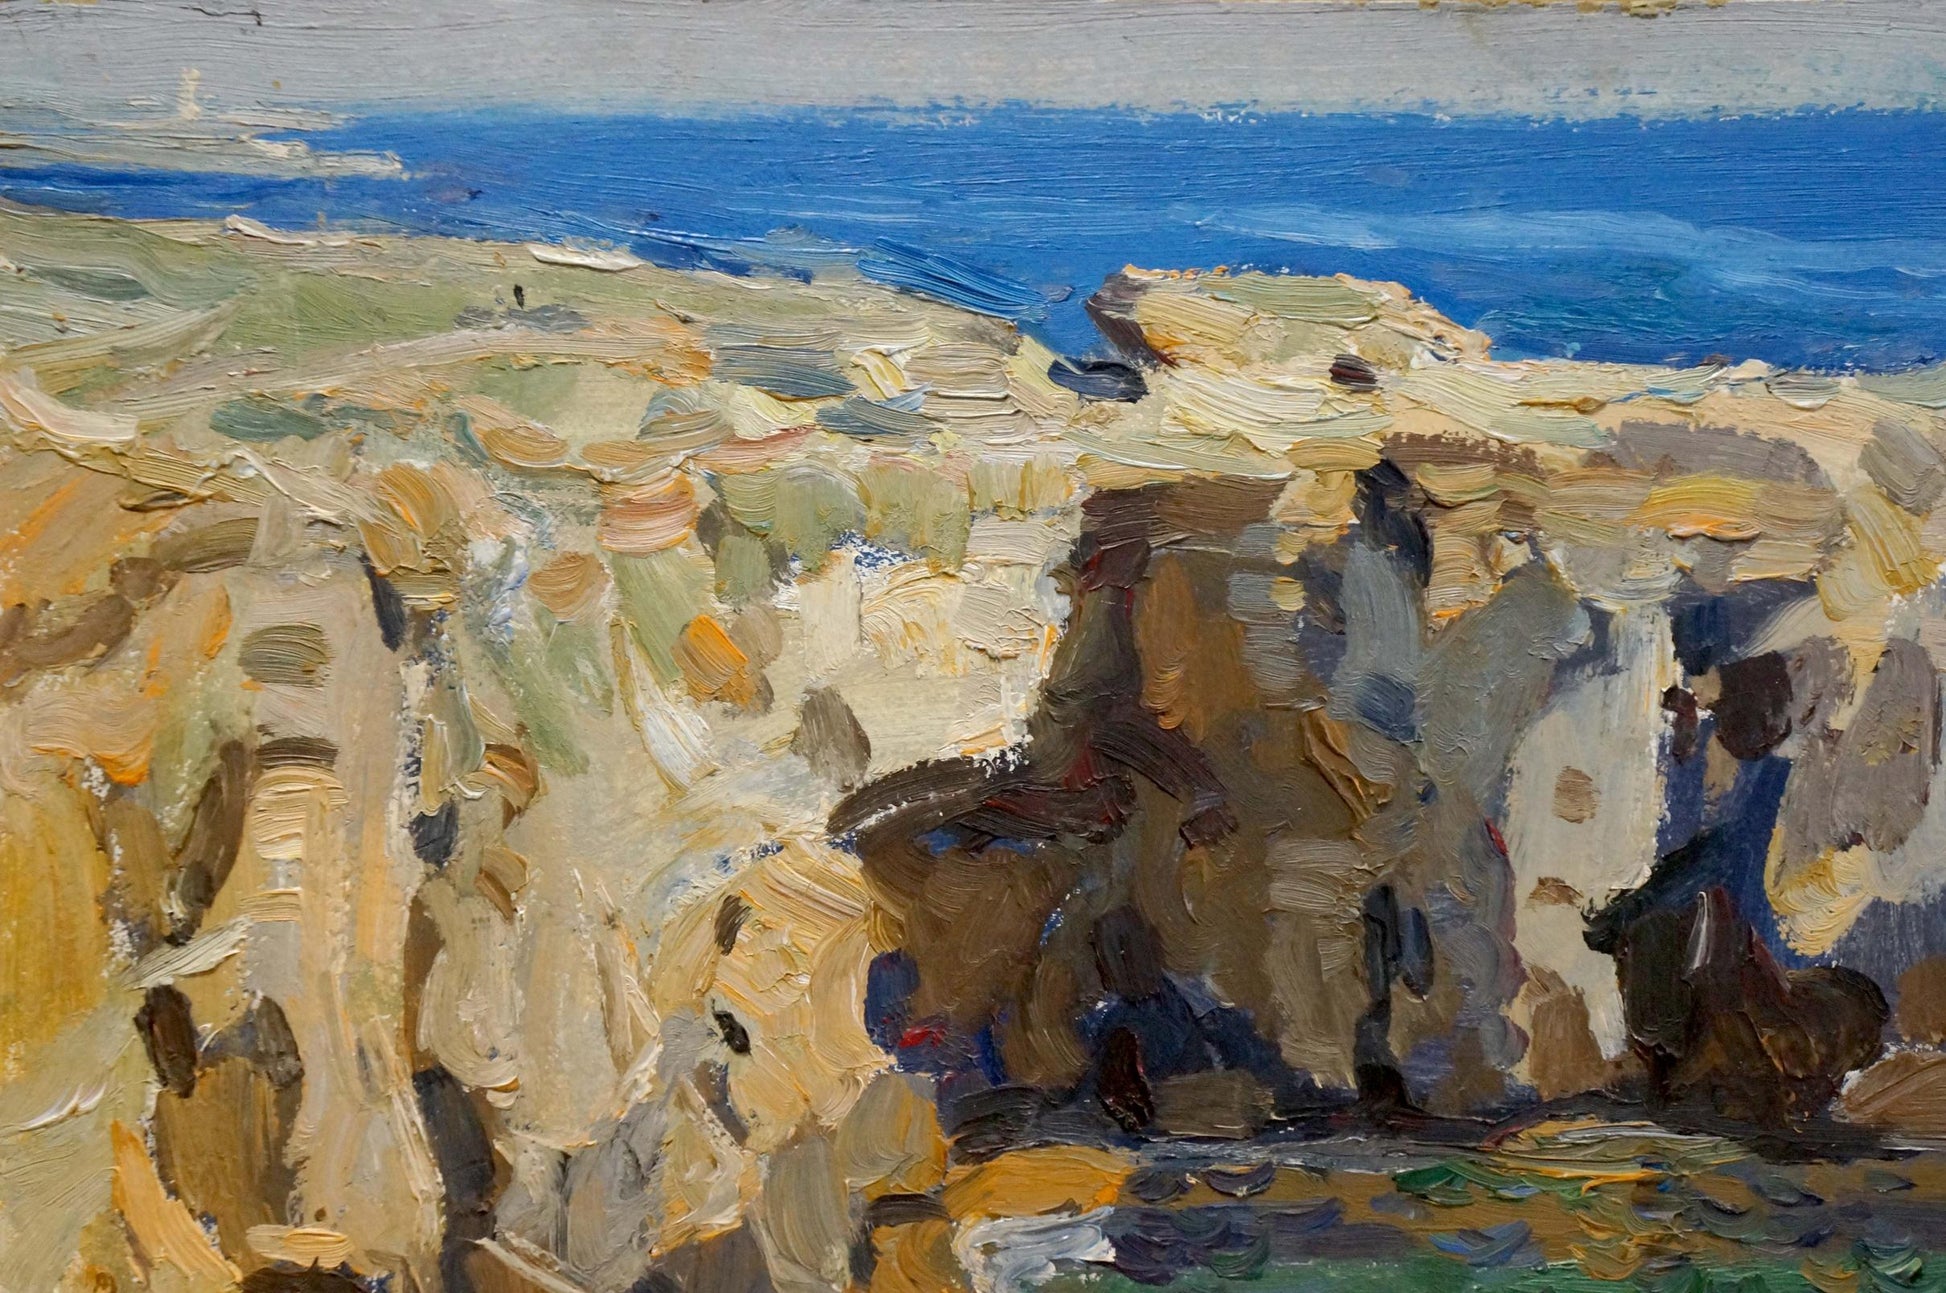 In his oil painting, Yuri Alexandrovich Konovalov captures a scenic view by a cliff